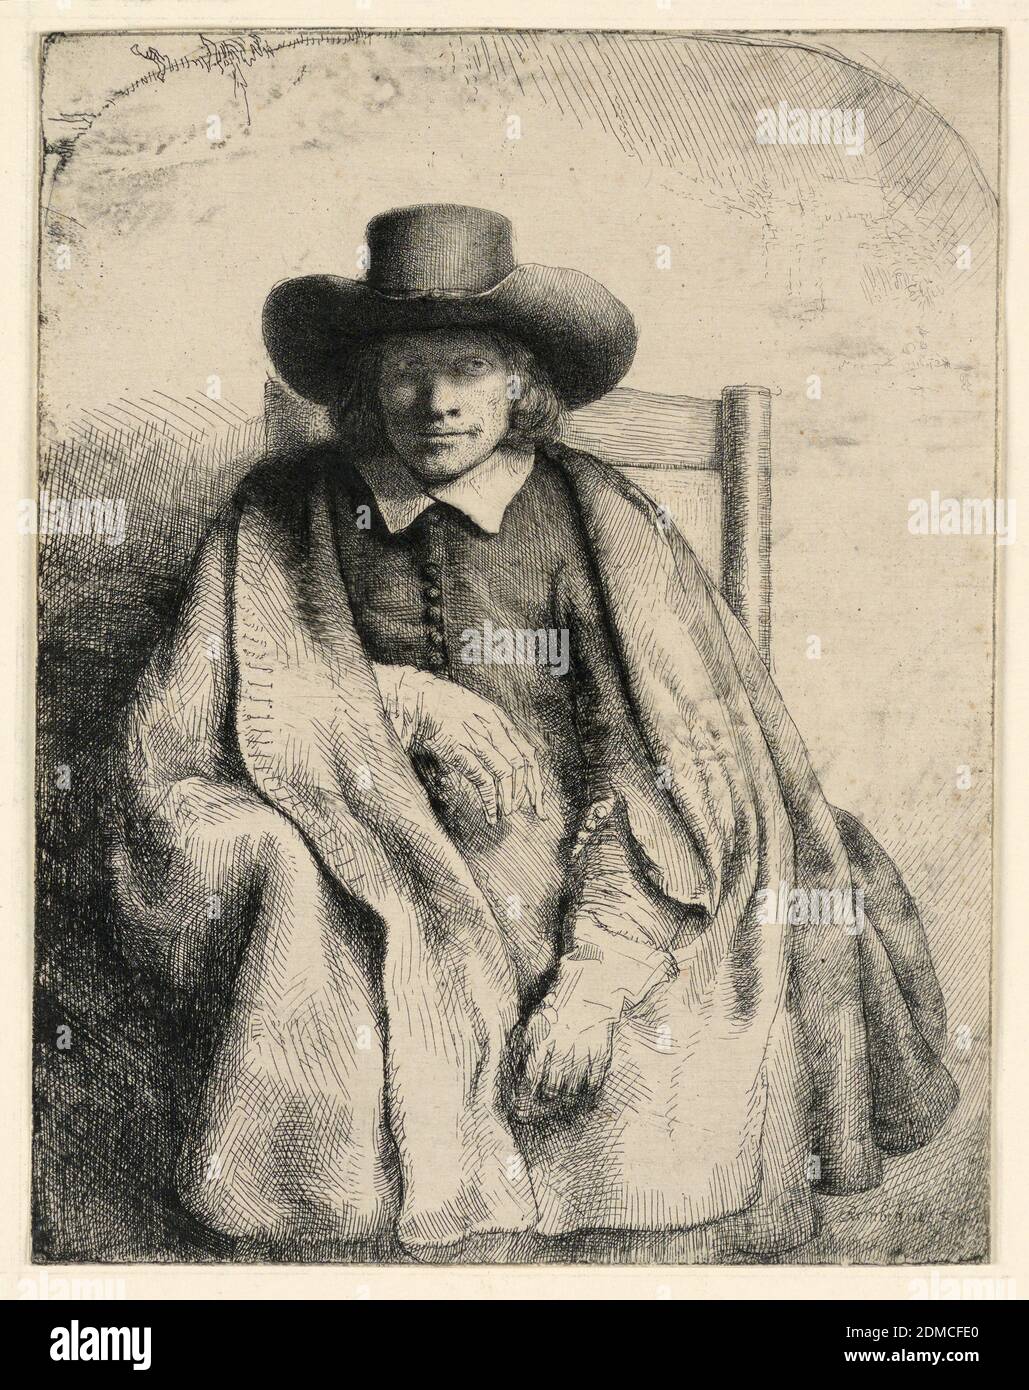 Clement de Jonghe, Printseller, Rembrandt Harmensz van Rijn, Dutch, 1606–1669, Etching on laid paper, Three-quarter length portrait of a man, seated, facing the spectator, the head shown full-face. He wears a cape, broad-rimmed hat, and gloves. Arched top., Netherlands, 1651, Print Stock Photo